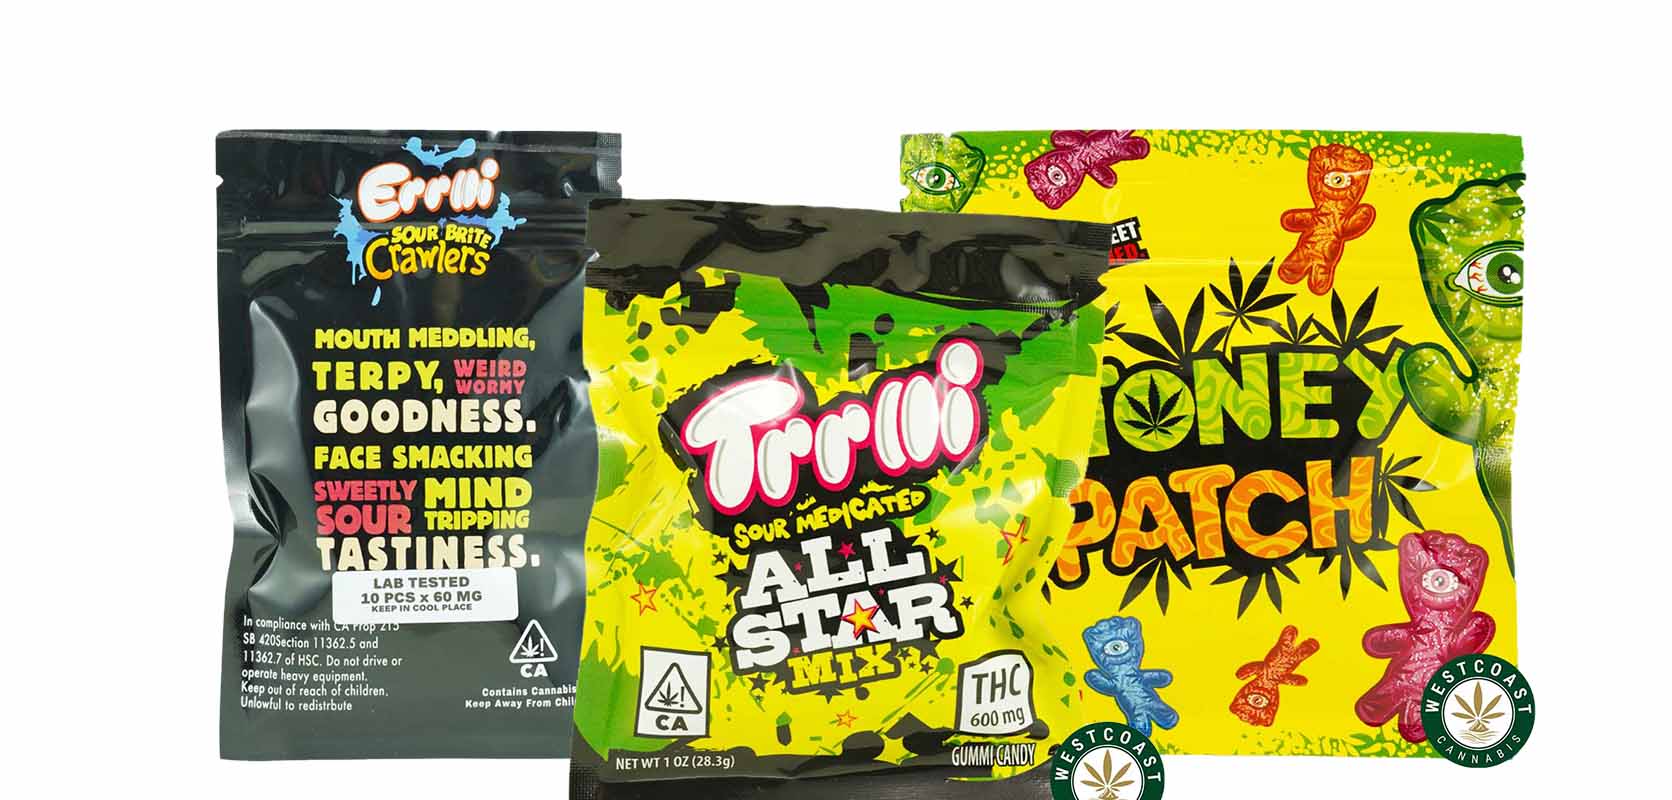 candy weed gummies and weed snacks for sale. buy marijuana online in canada.